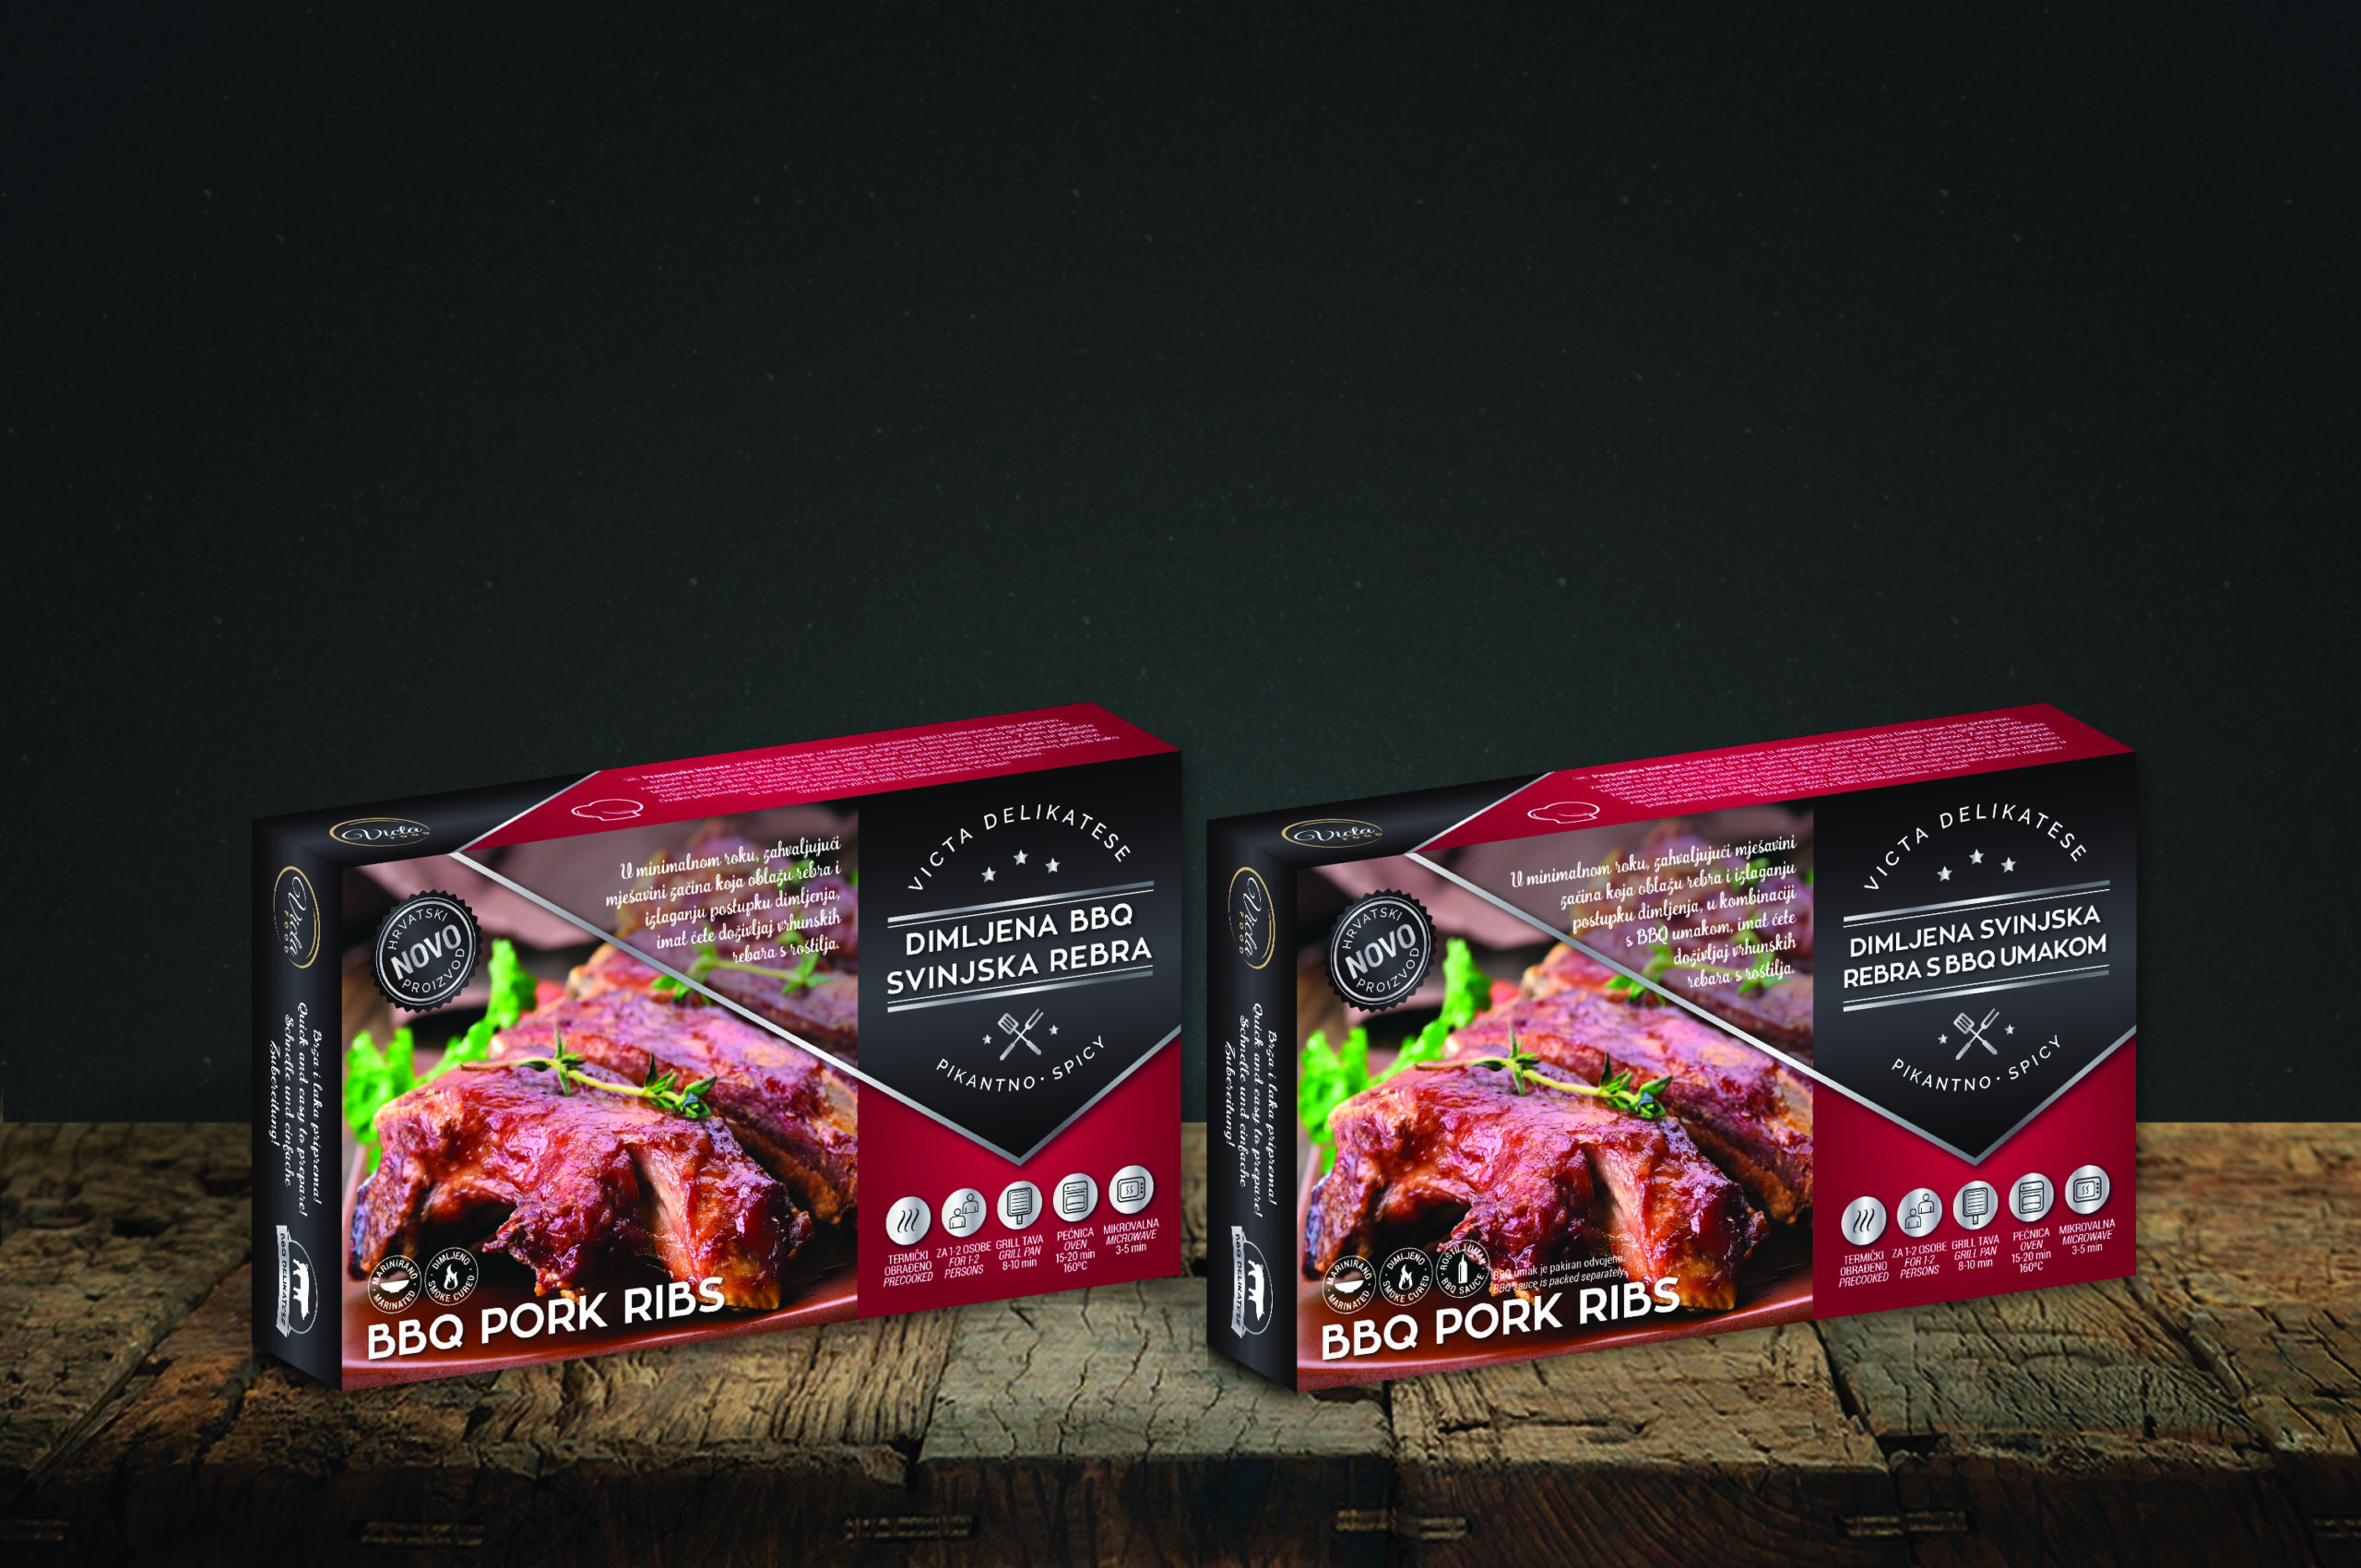 The picture shows all packages of BBQ Pork Ribs products from Victa Food. The products are placed on a wooden base with a dark gray background. The packaging is red and dark gray with a white font.